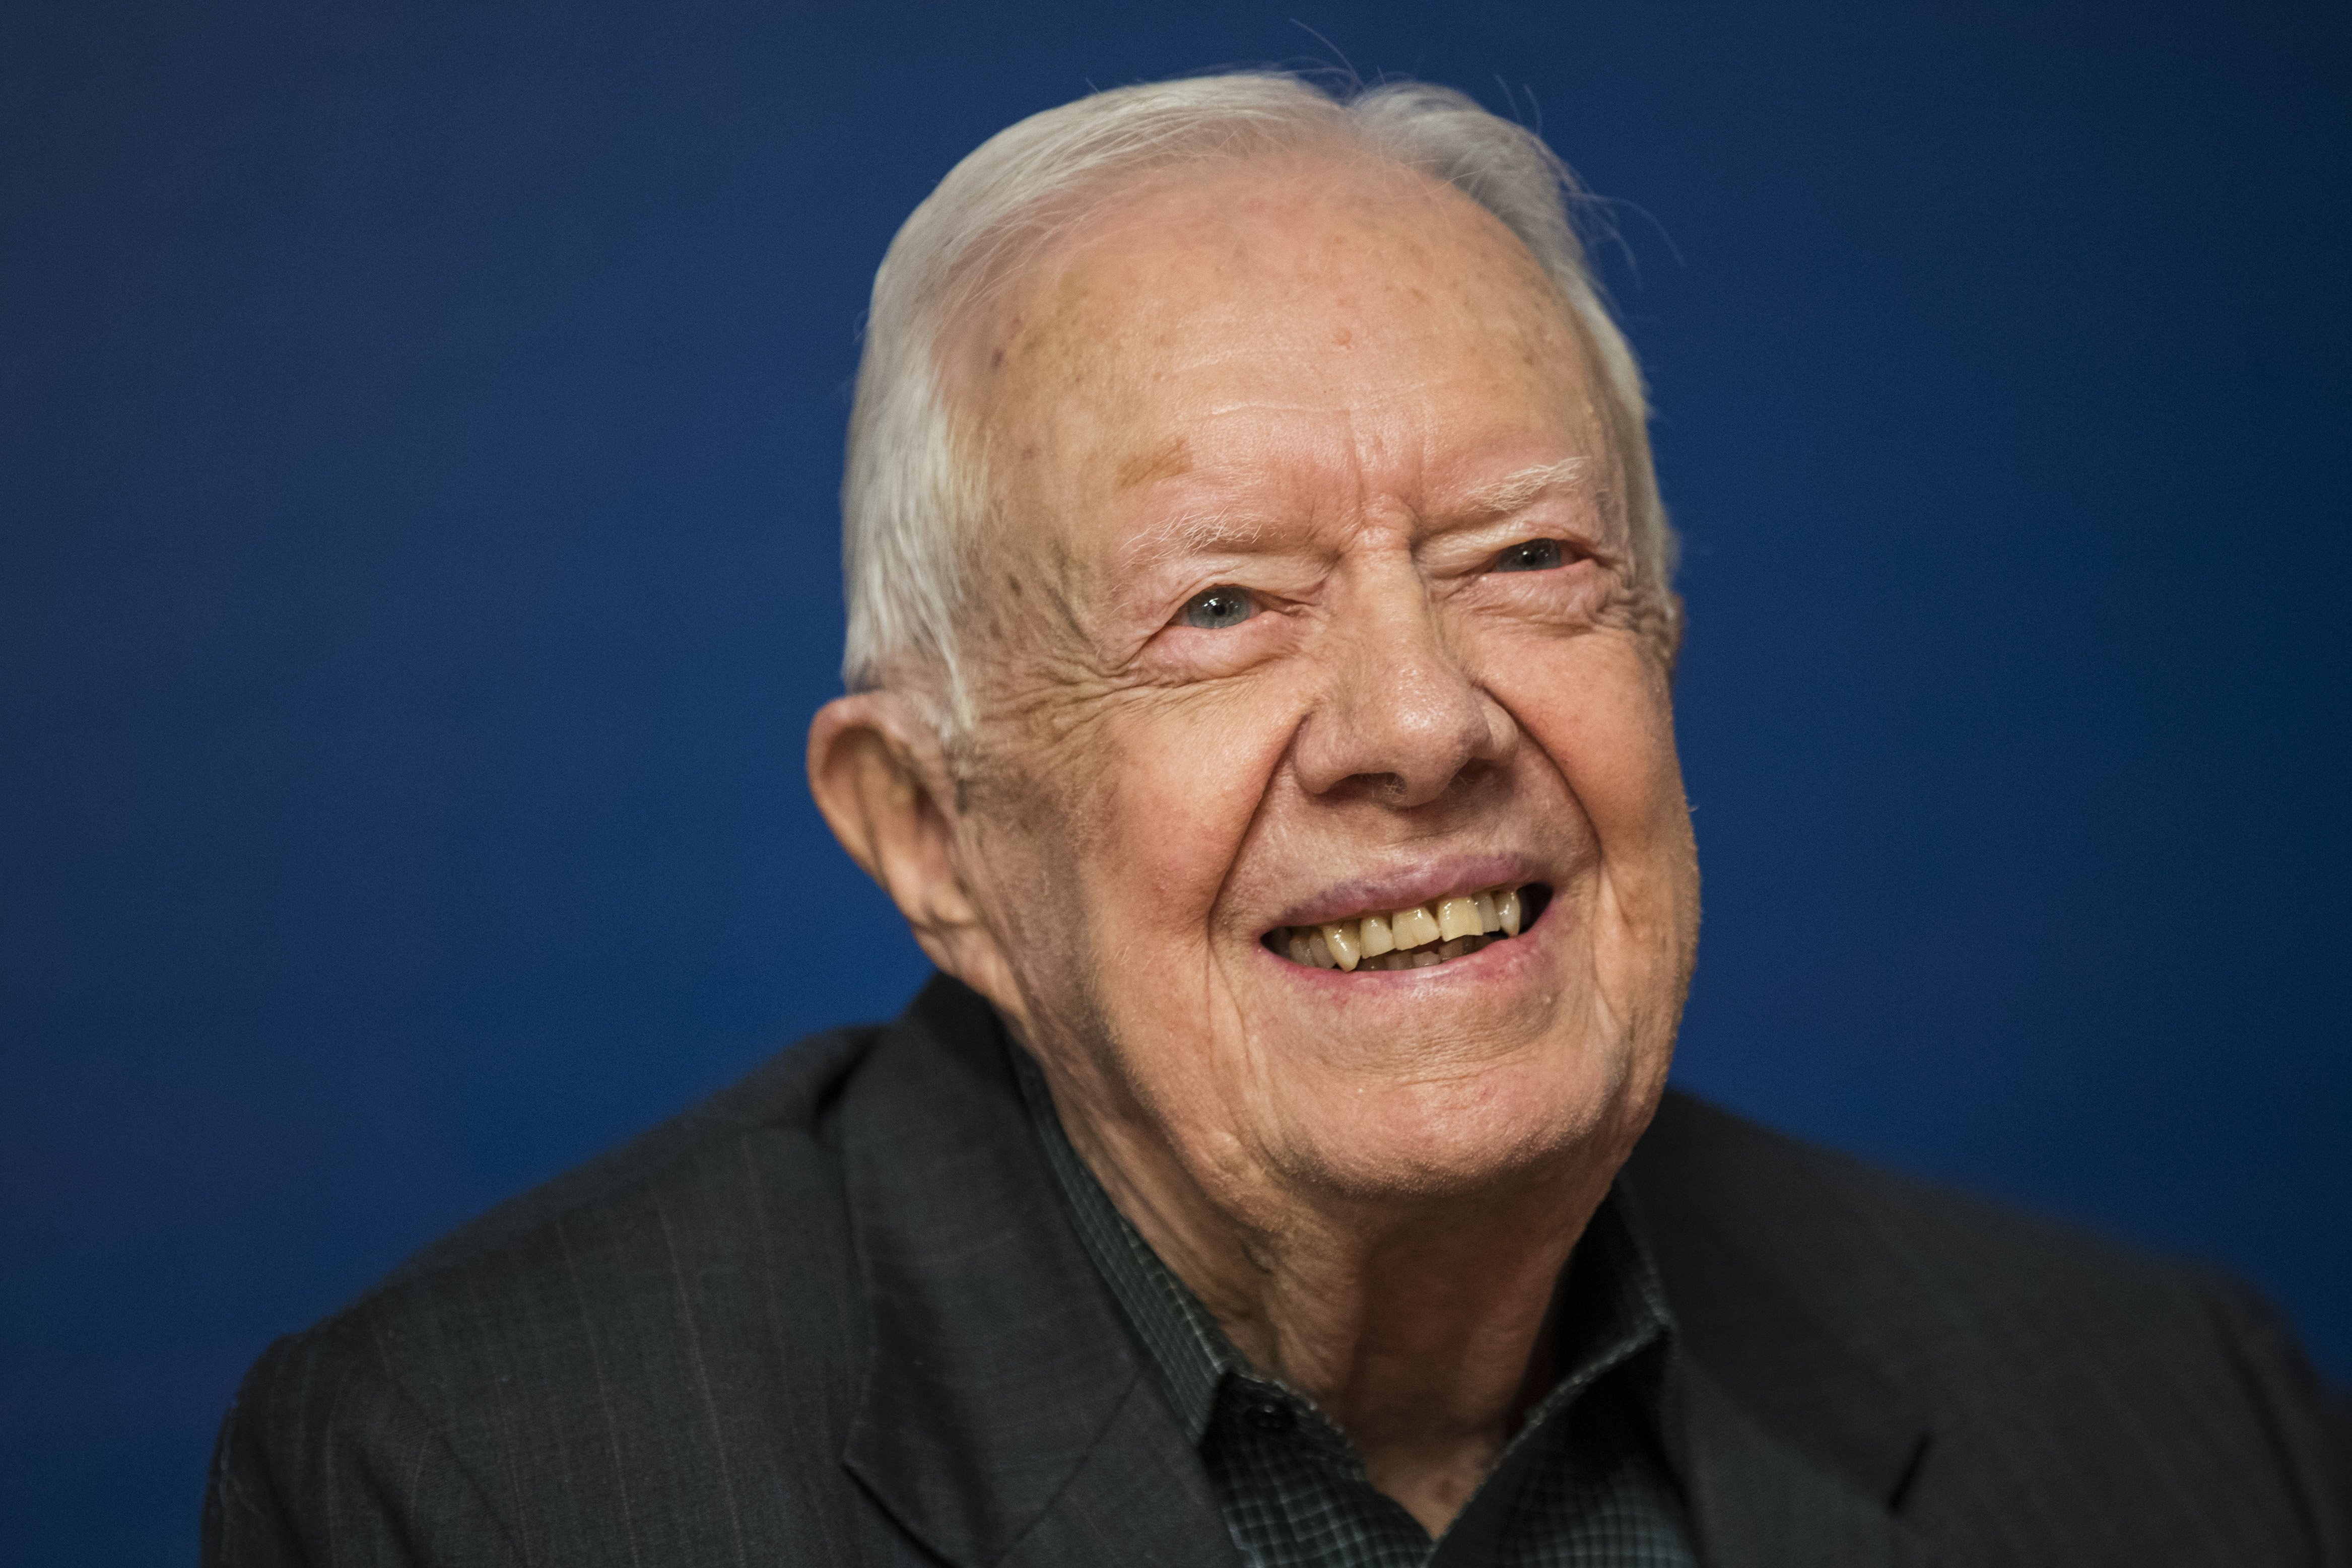 Former U.S. President Jimmy Carter smiles during a book signing event on March 26, 2018, in New York City  | Photo: Getty Images.